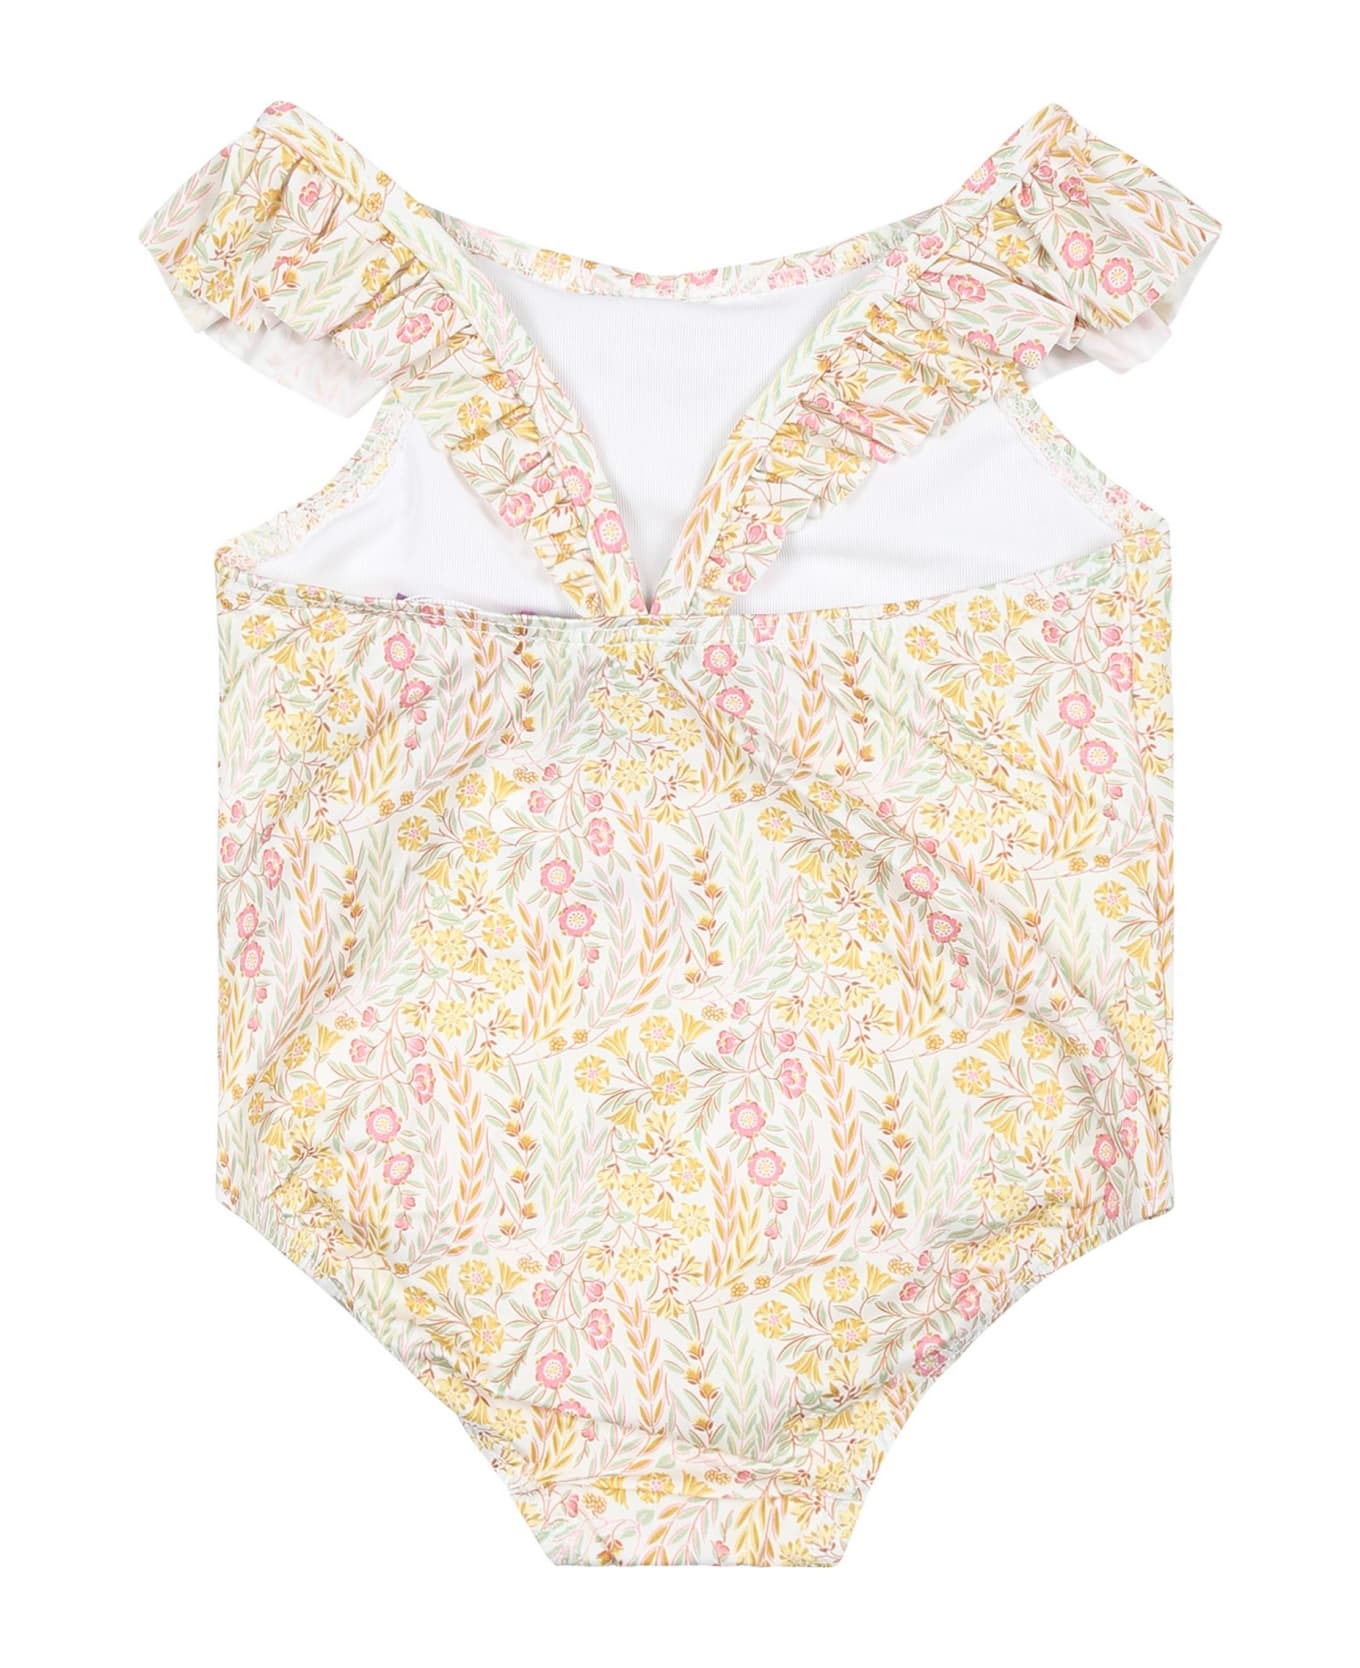 Tartine et Chocolat Ivory One-piece Swimsuit For Baby Girl With Liberty Fabric - Ivory 水着